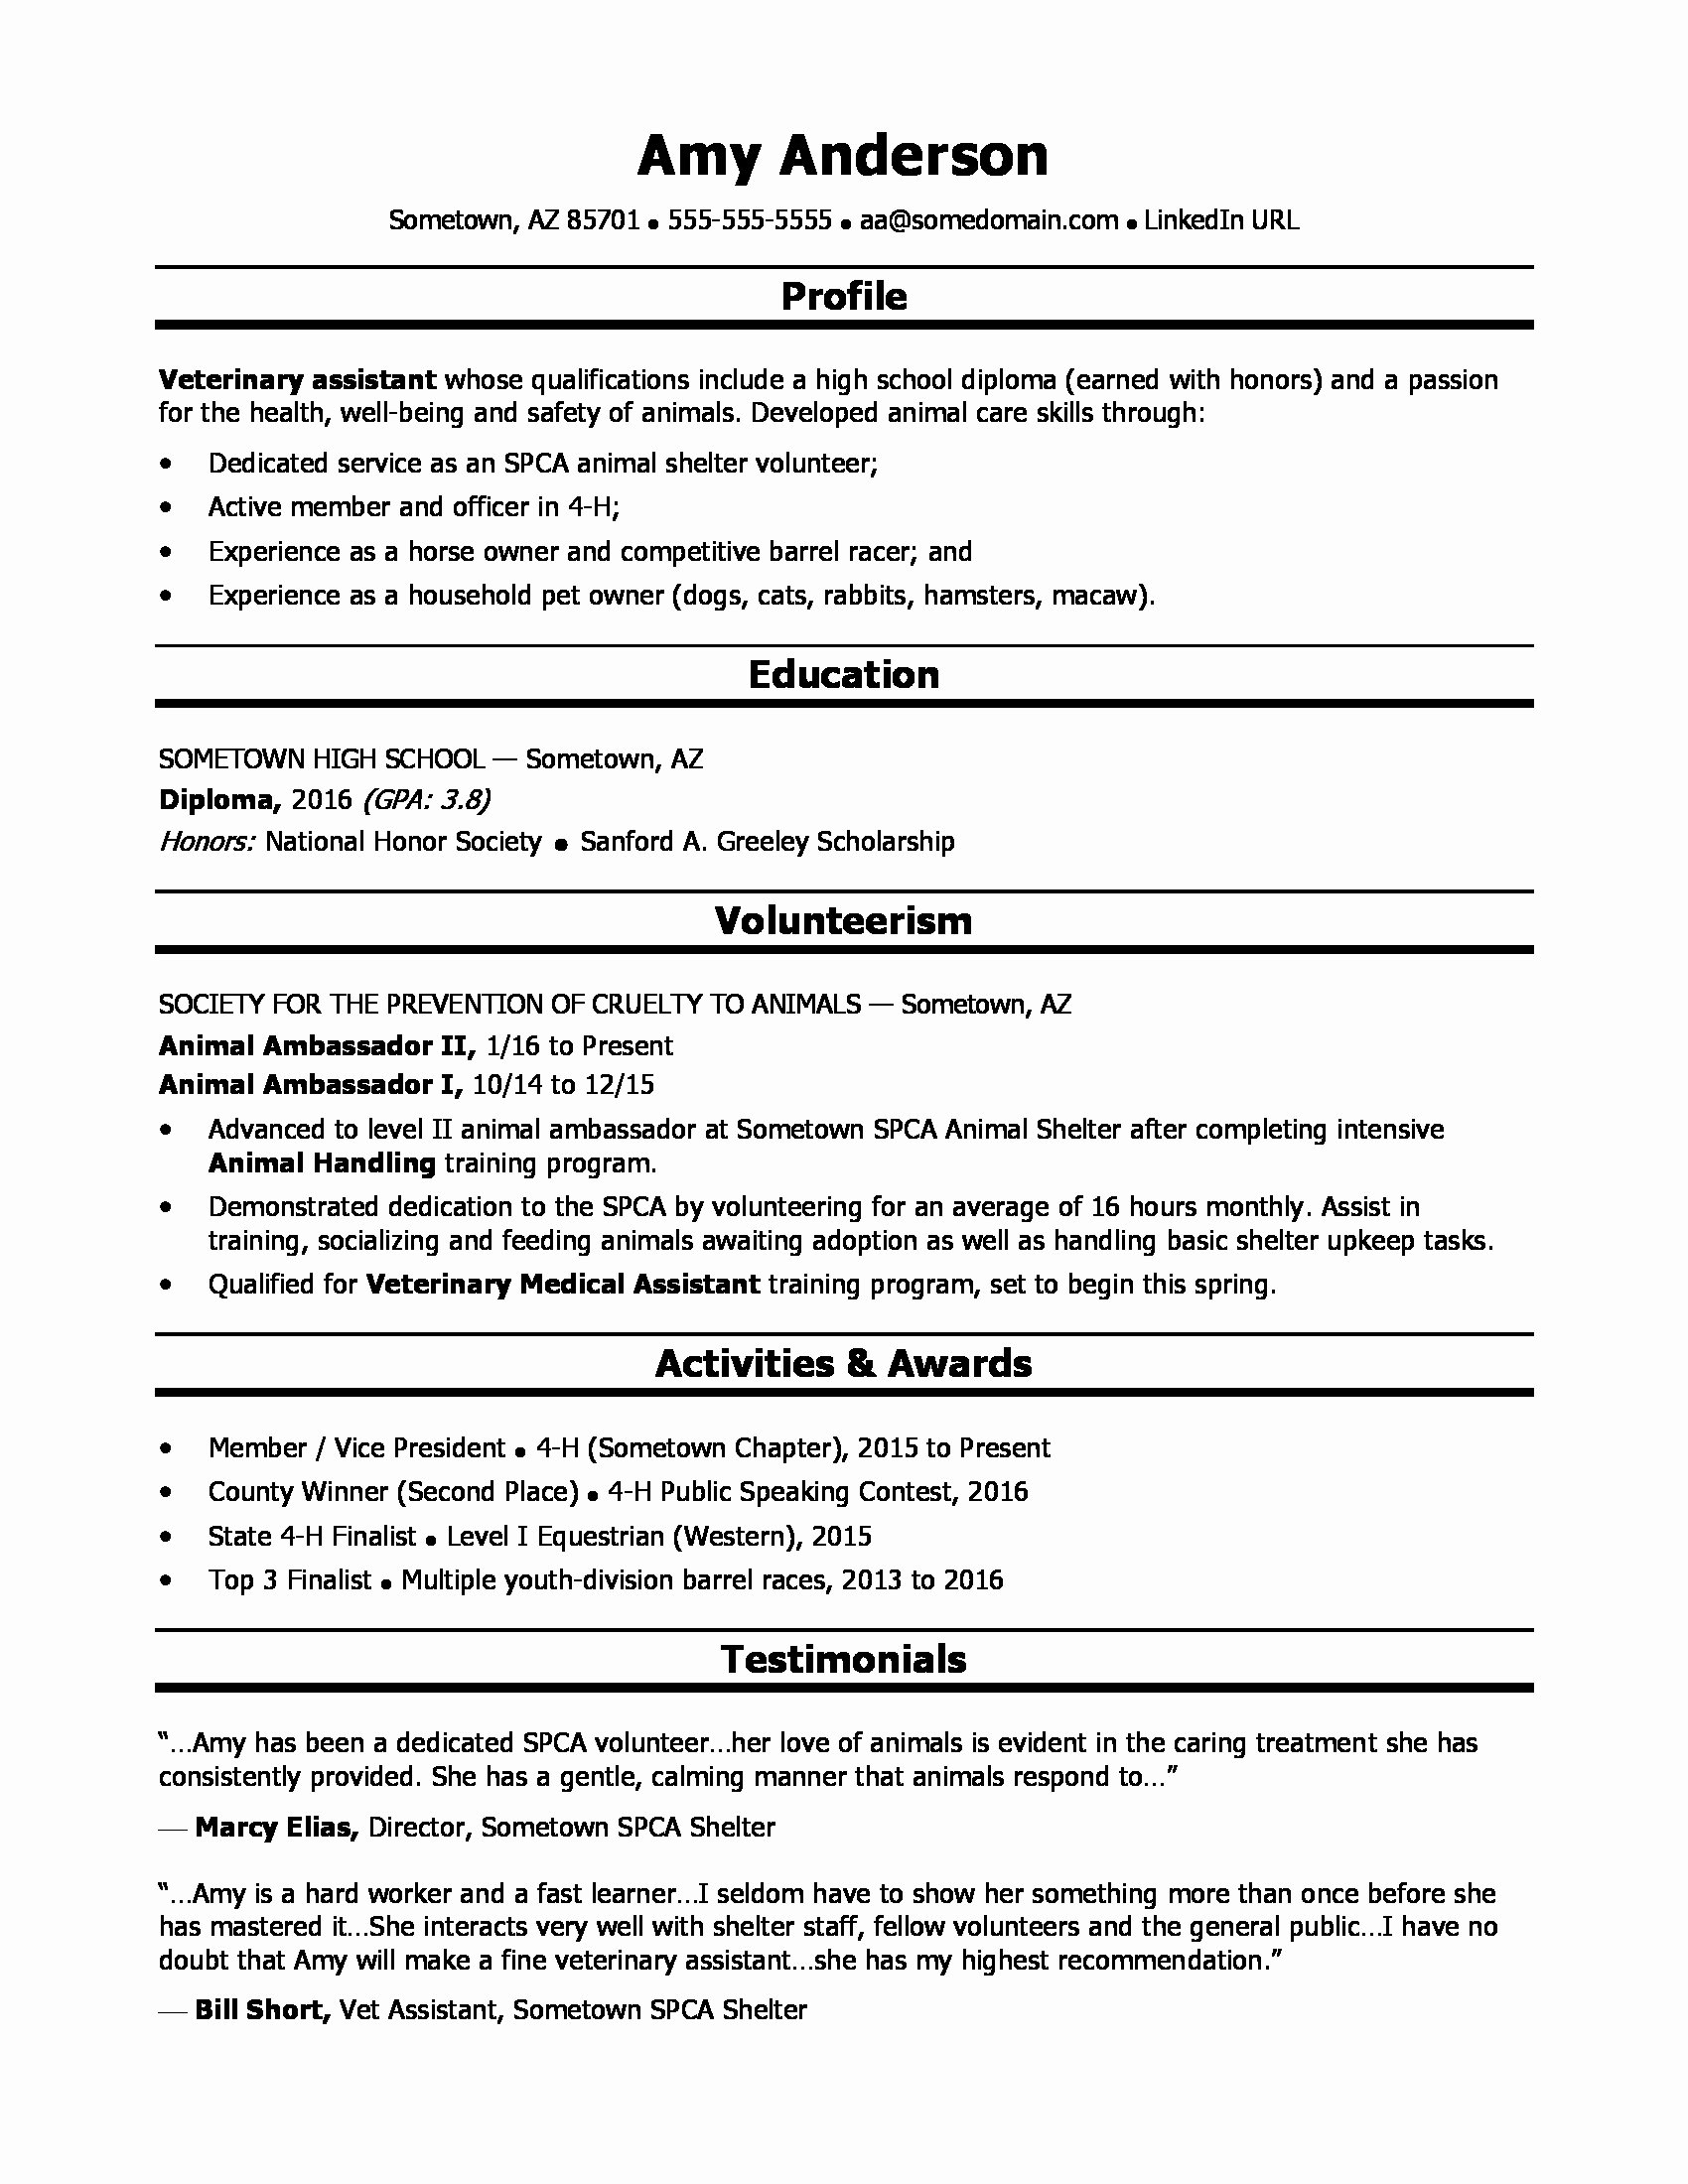 National Honor society Certificate Template Inspirational High School Grad Resume Sample